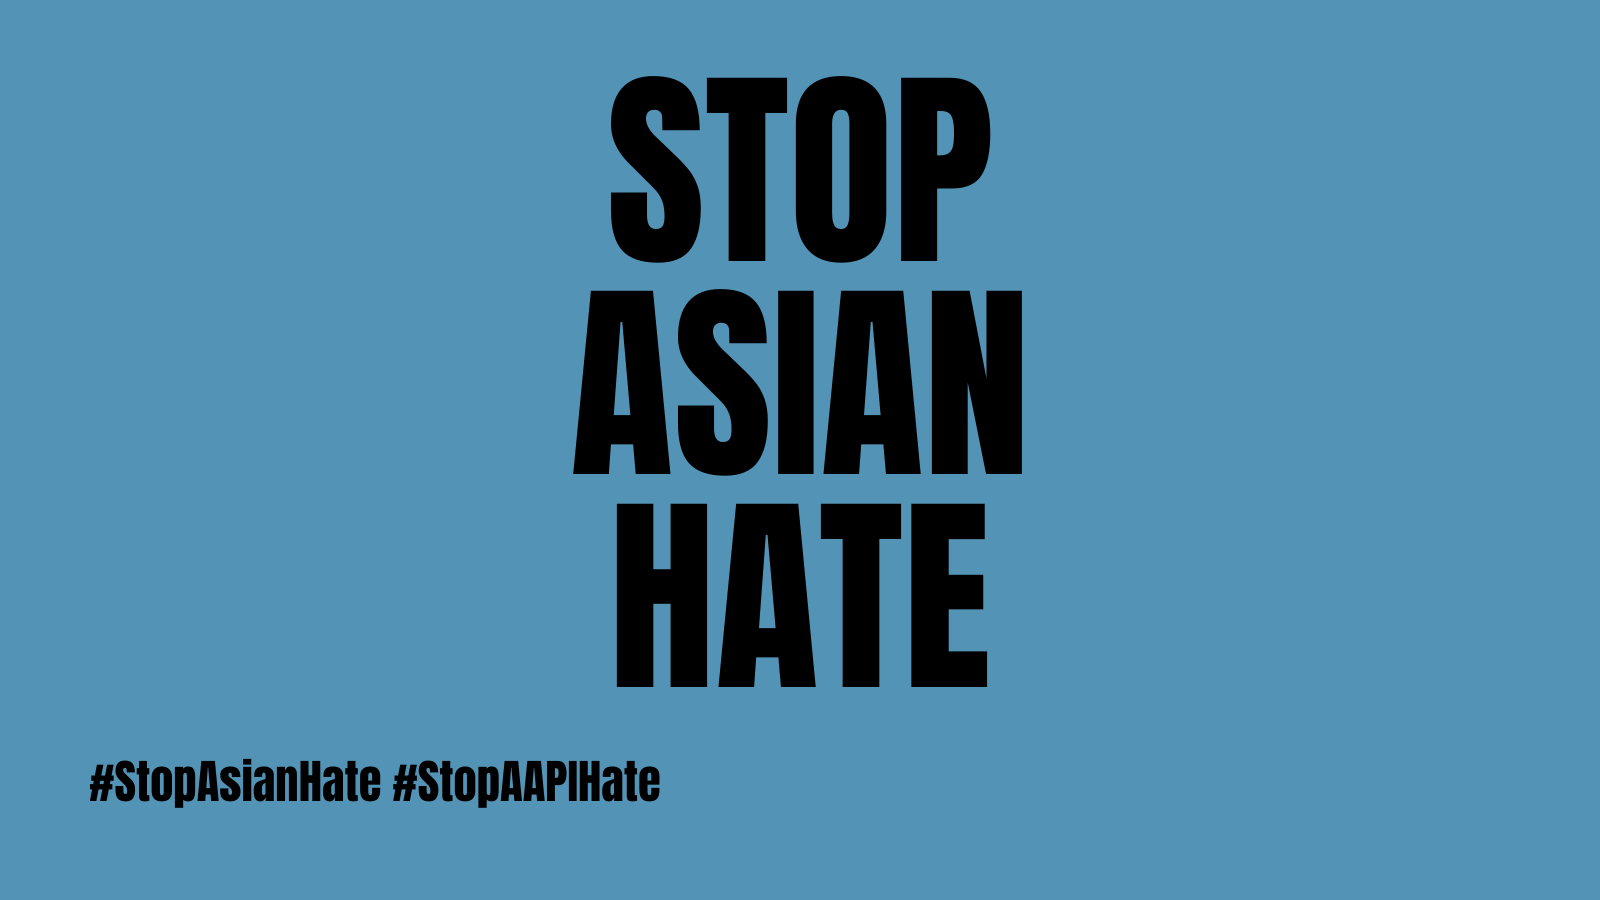 Black text on blue background that reads Stop Asian Hate and includes the hashtags #StopAsianHate and #StopAAPIHate